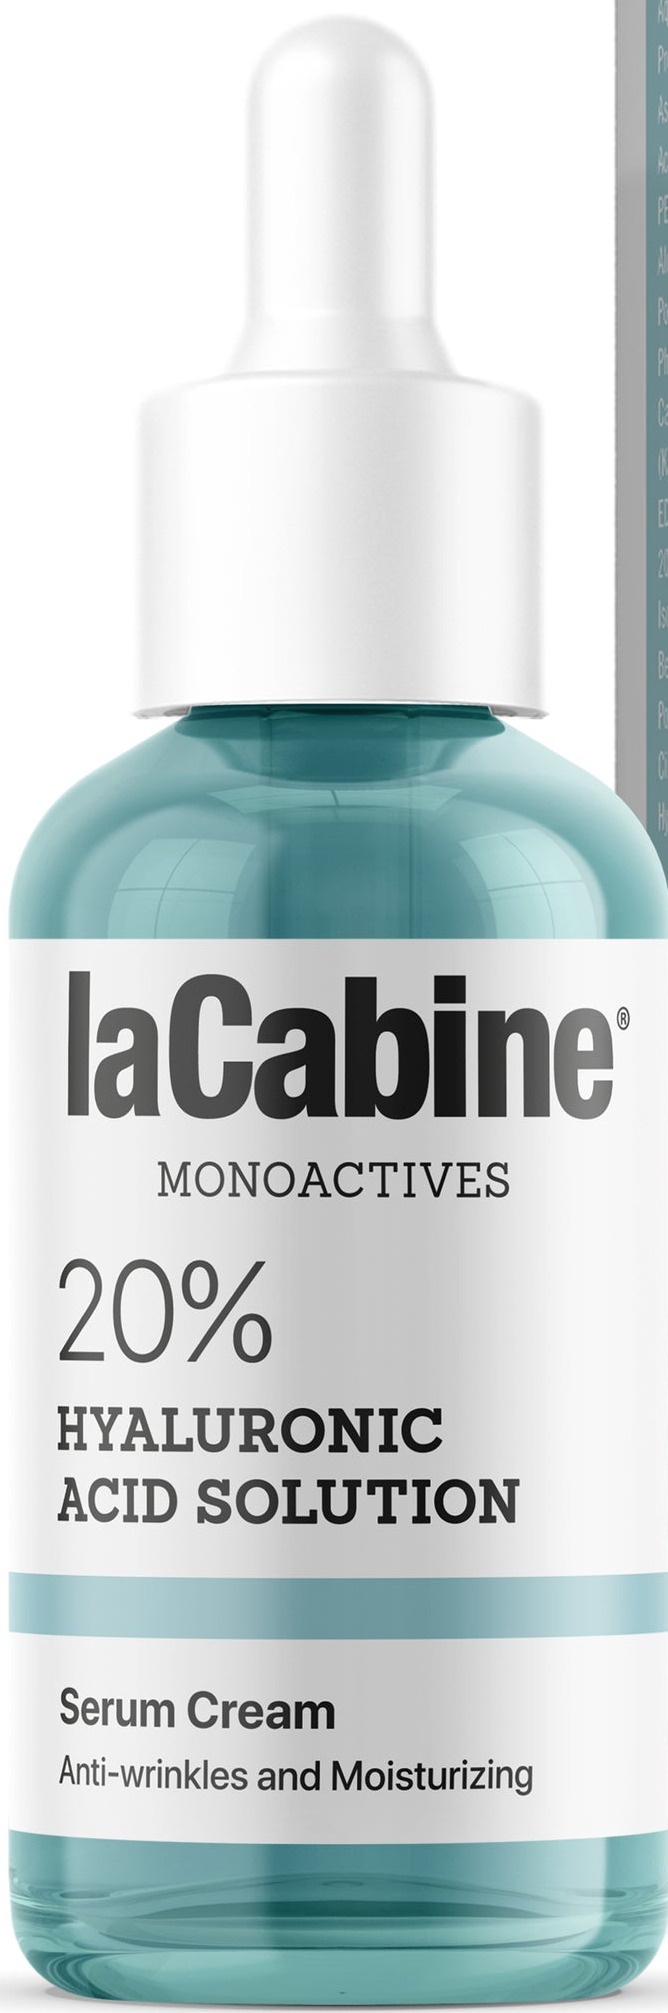 LaCabine 20% Hyaluronic Acid Solution